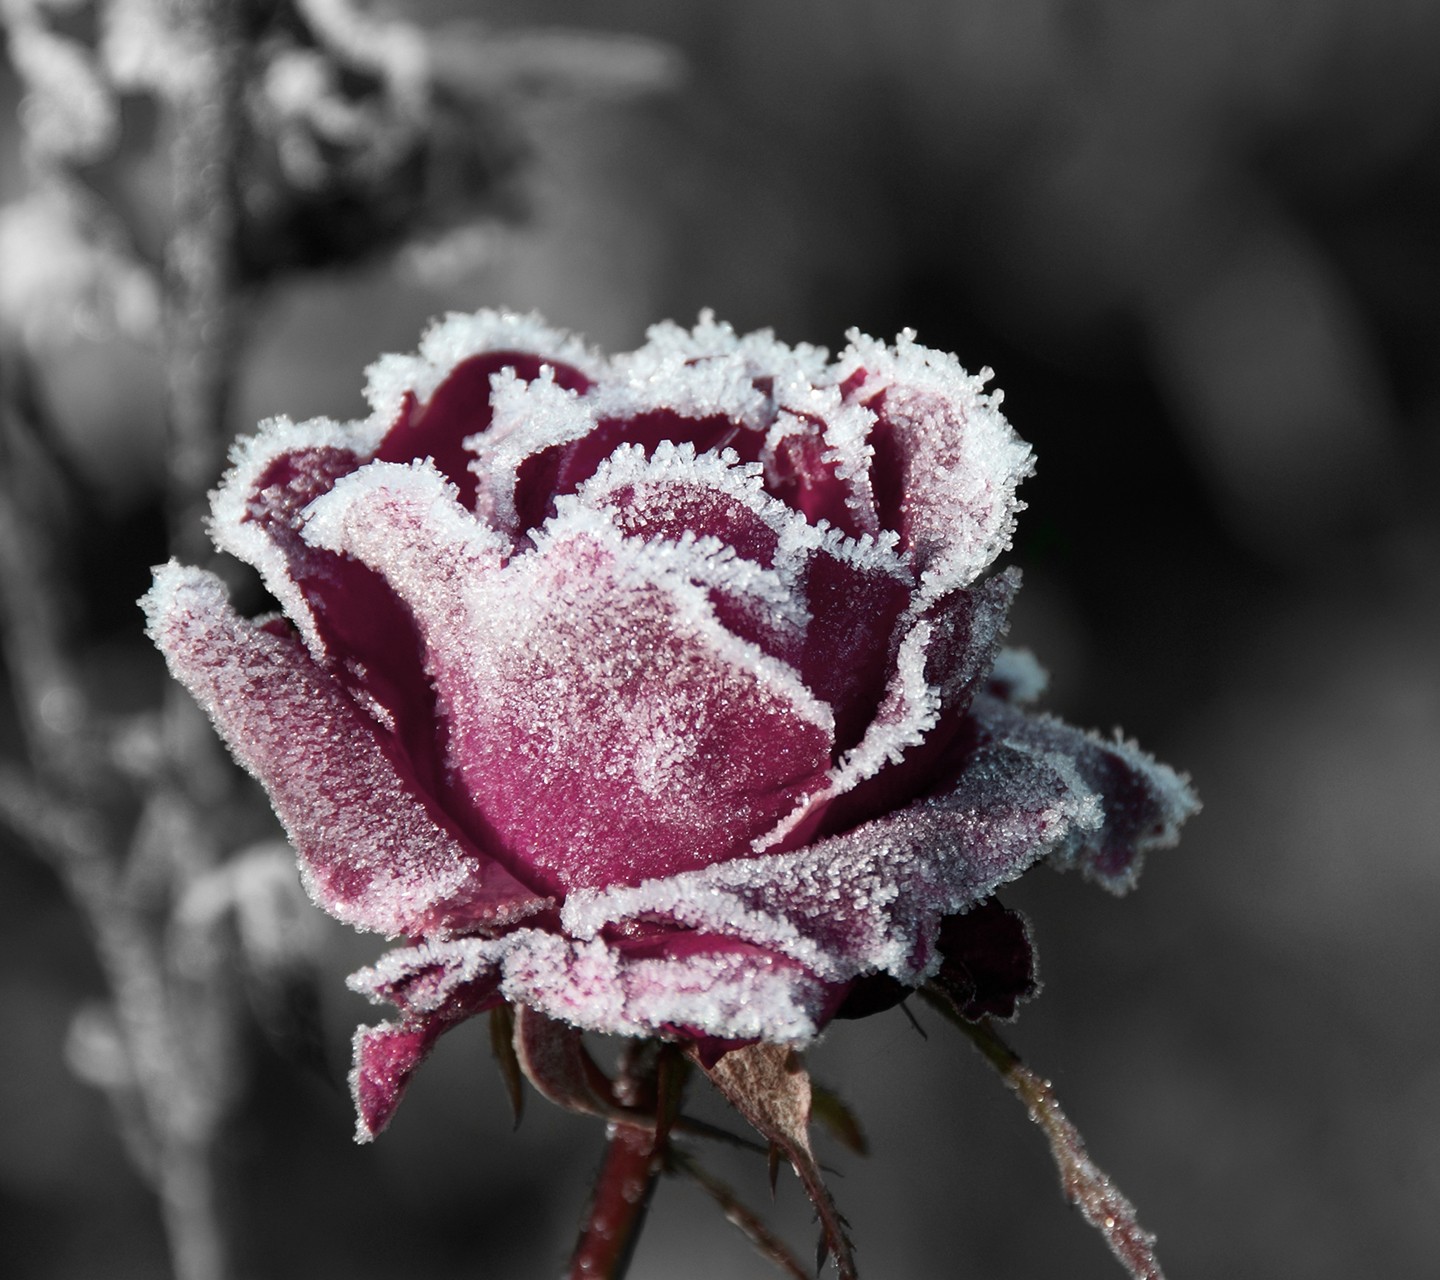 General 1440x1280 rose frost selective coloring flowers plants winter ice cold outdoors